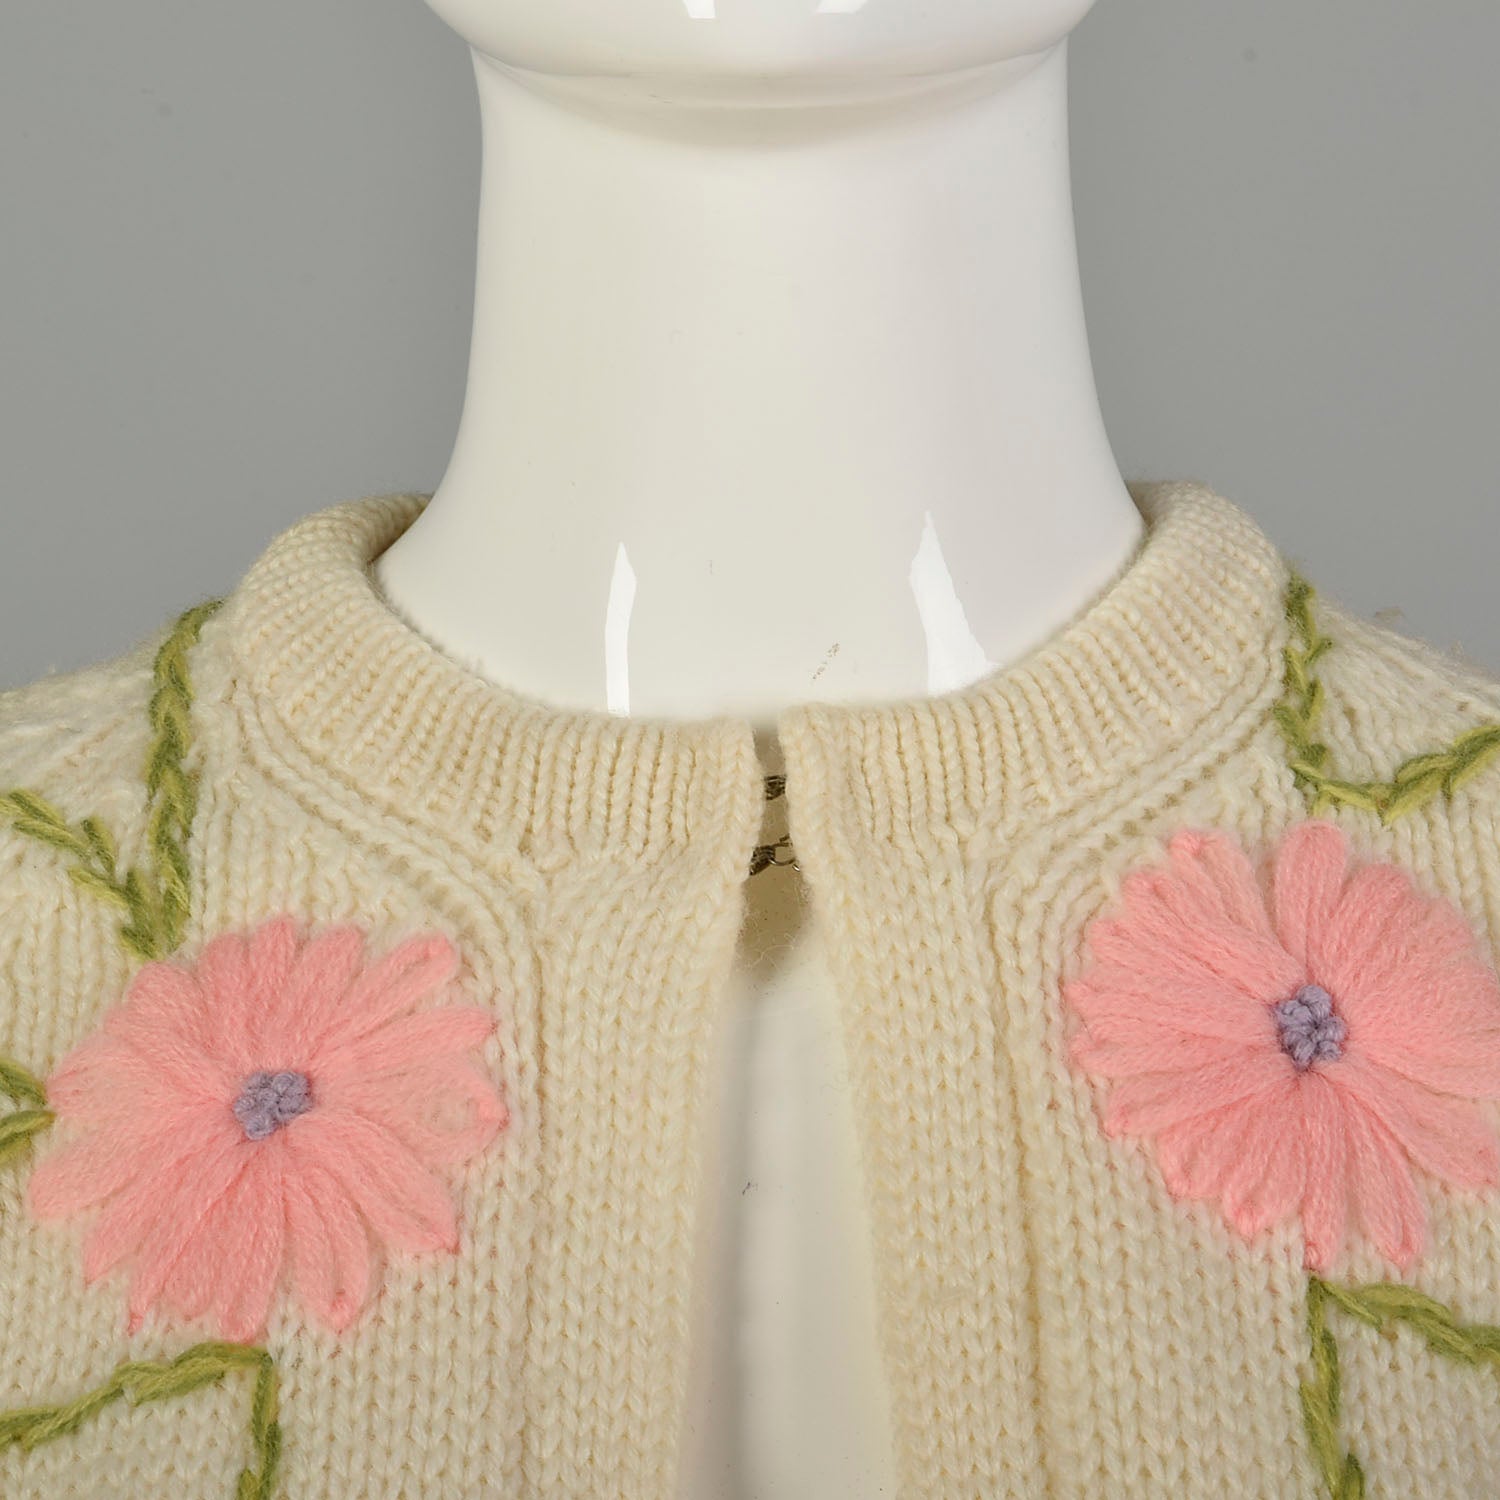 Small 1960s Embroidered Cardigan Sweater Colorful Flowers On Off-White Knit